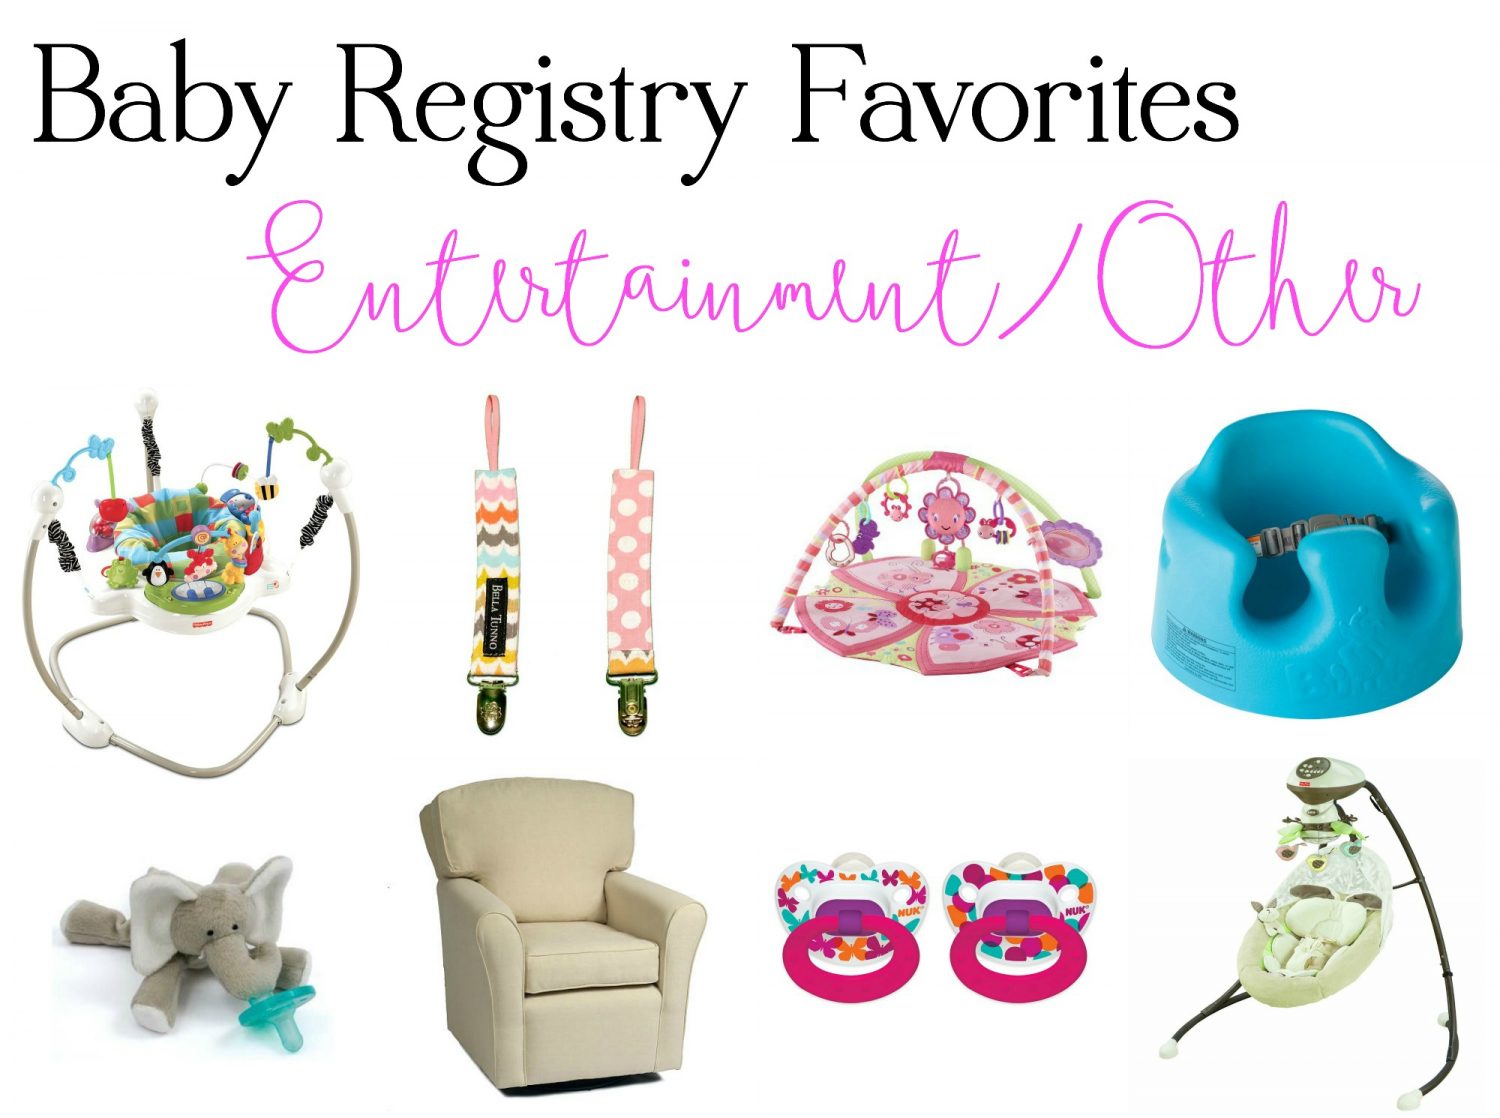 Second baby registry: This blog post covers all of the items that I absolutely loved using with our first baby and will continue to use with our second baby. There are so many baby items out there, but this list is tried and true! You truly cannot go wrong with any item on this list for your baby. This list covers diapering, feeding, wellness, travel, play, and much more. 